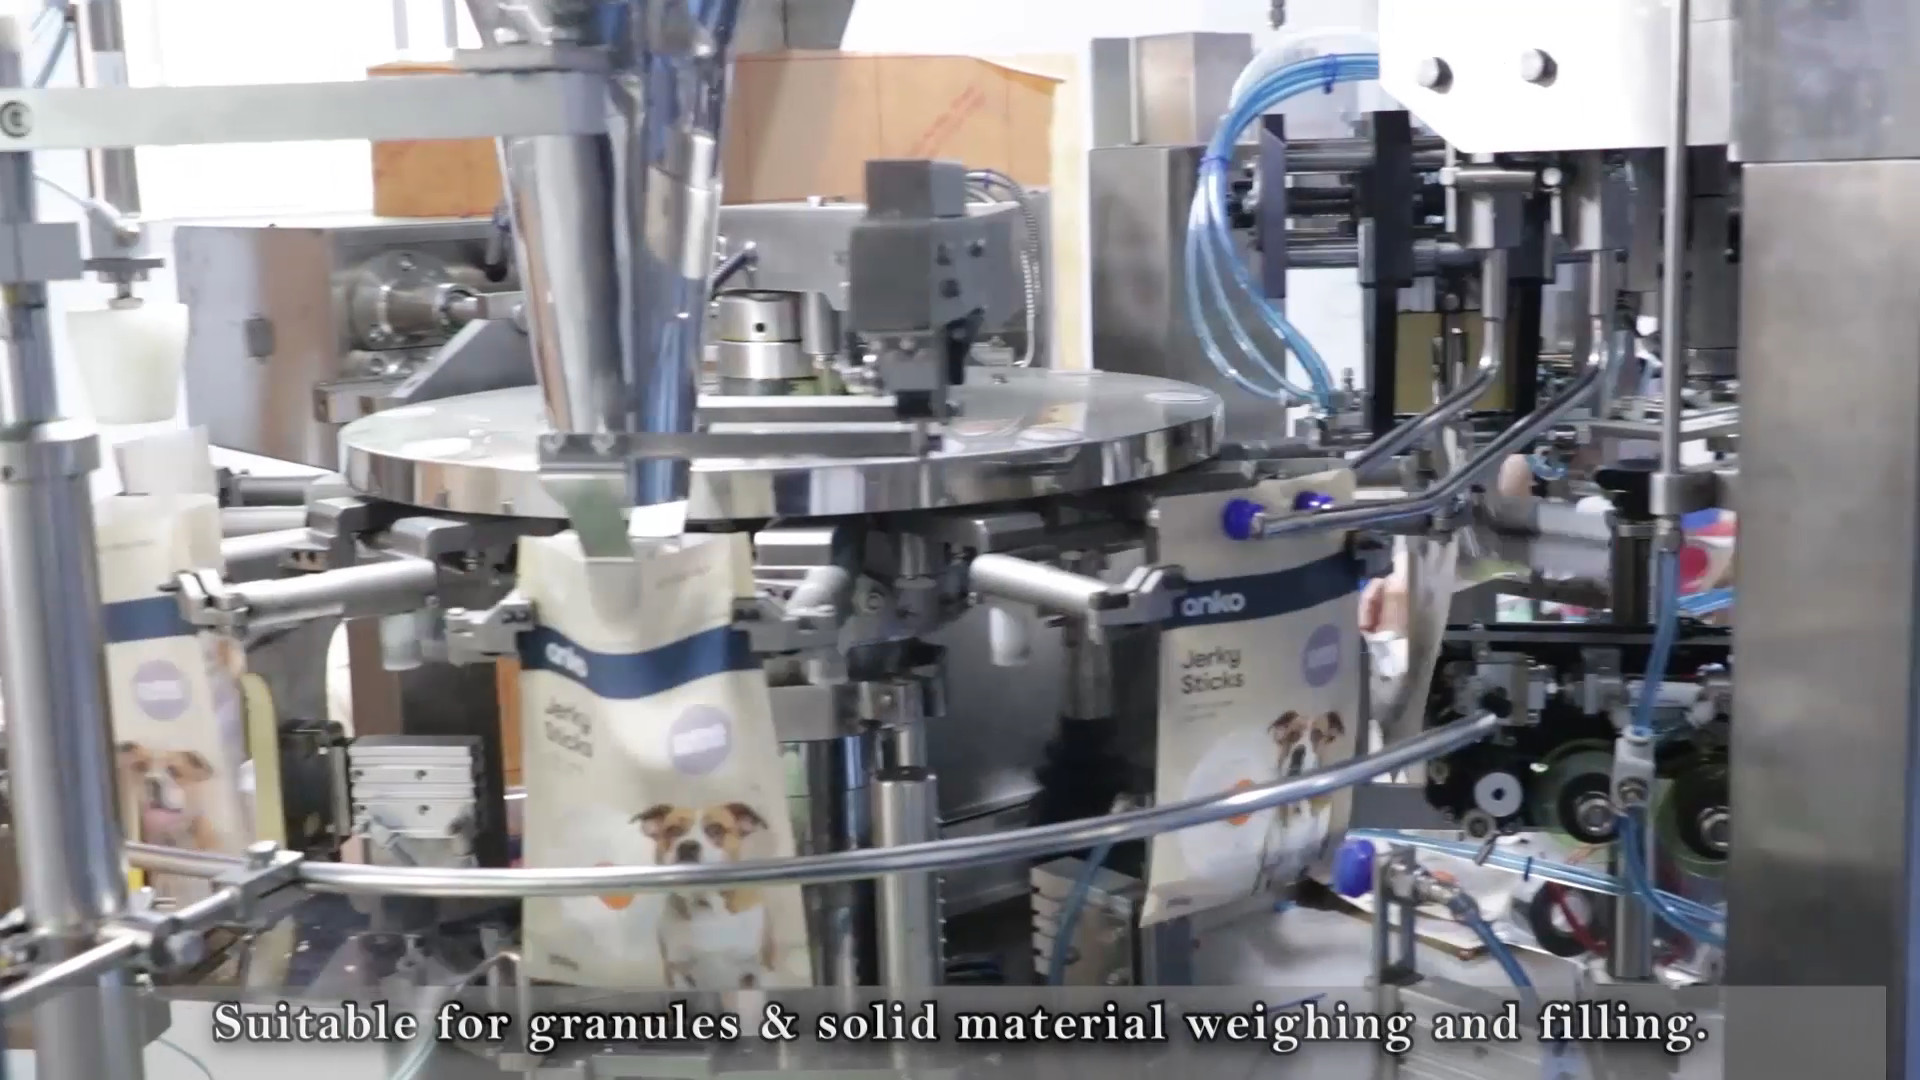 Premade Bag Nut Food Packaging Machine Multihead Weighing Automatic